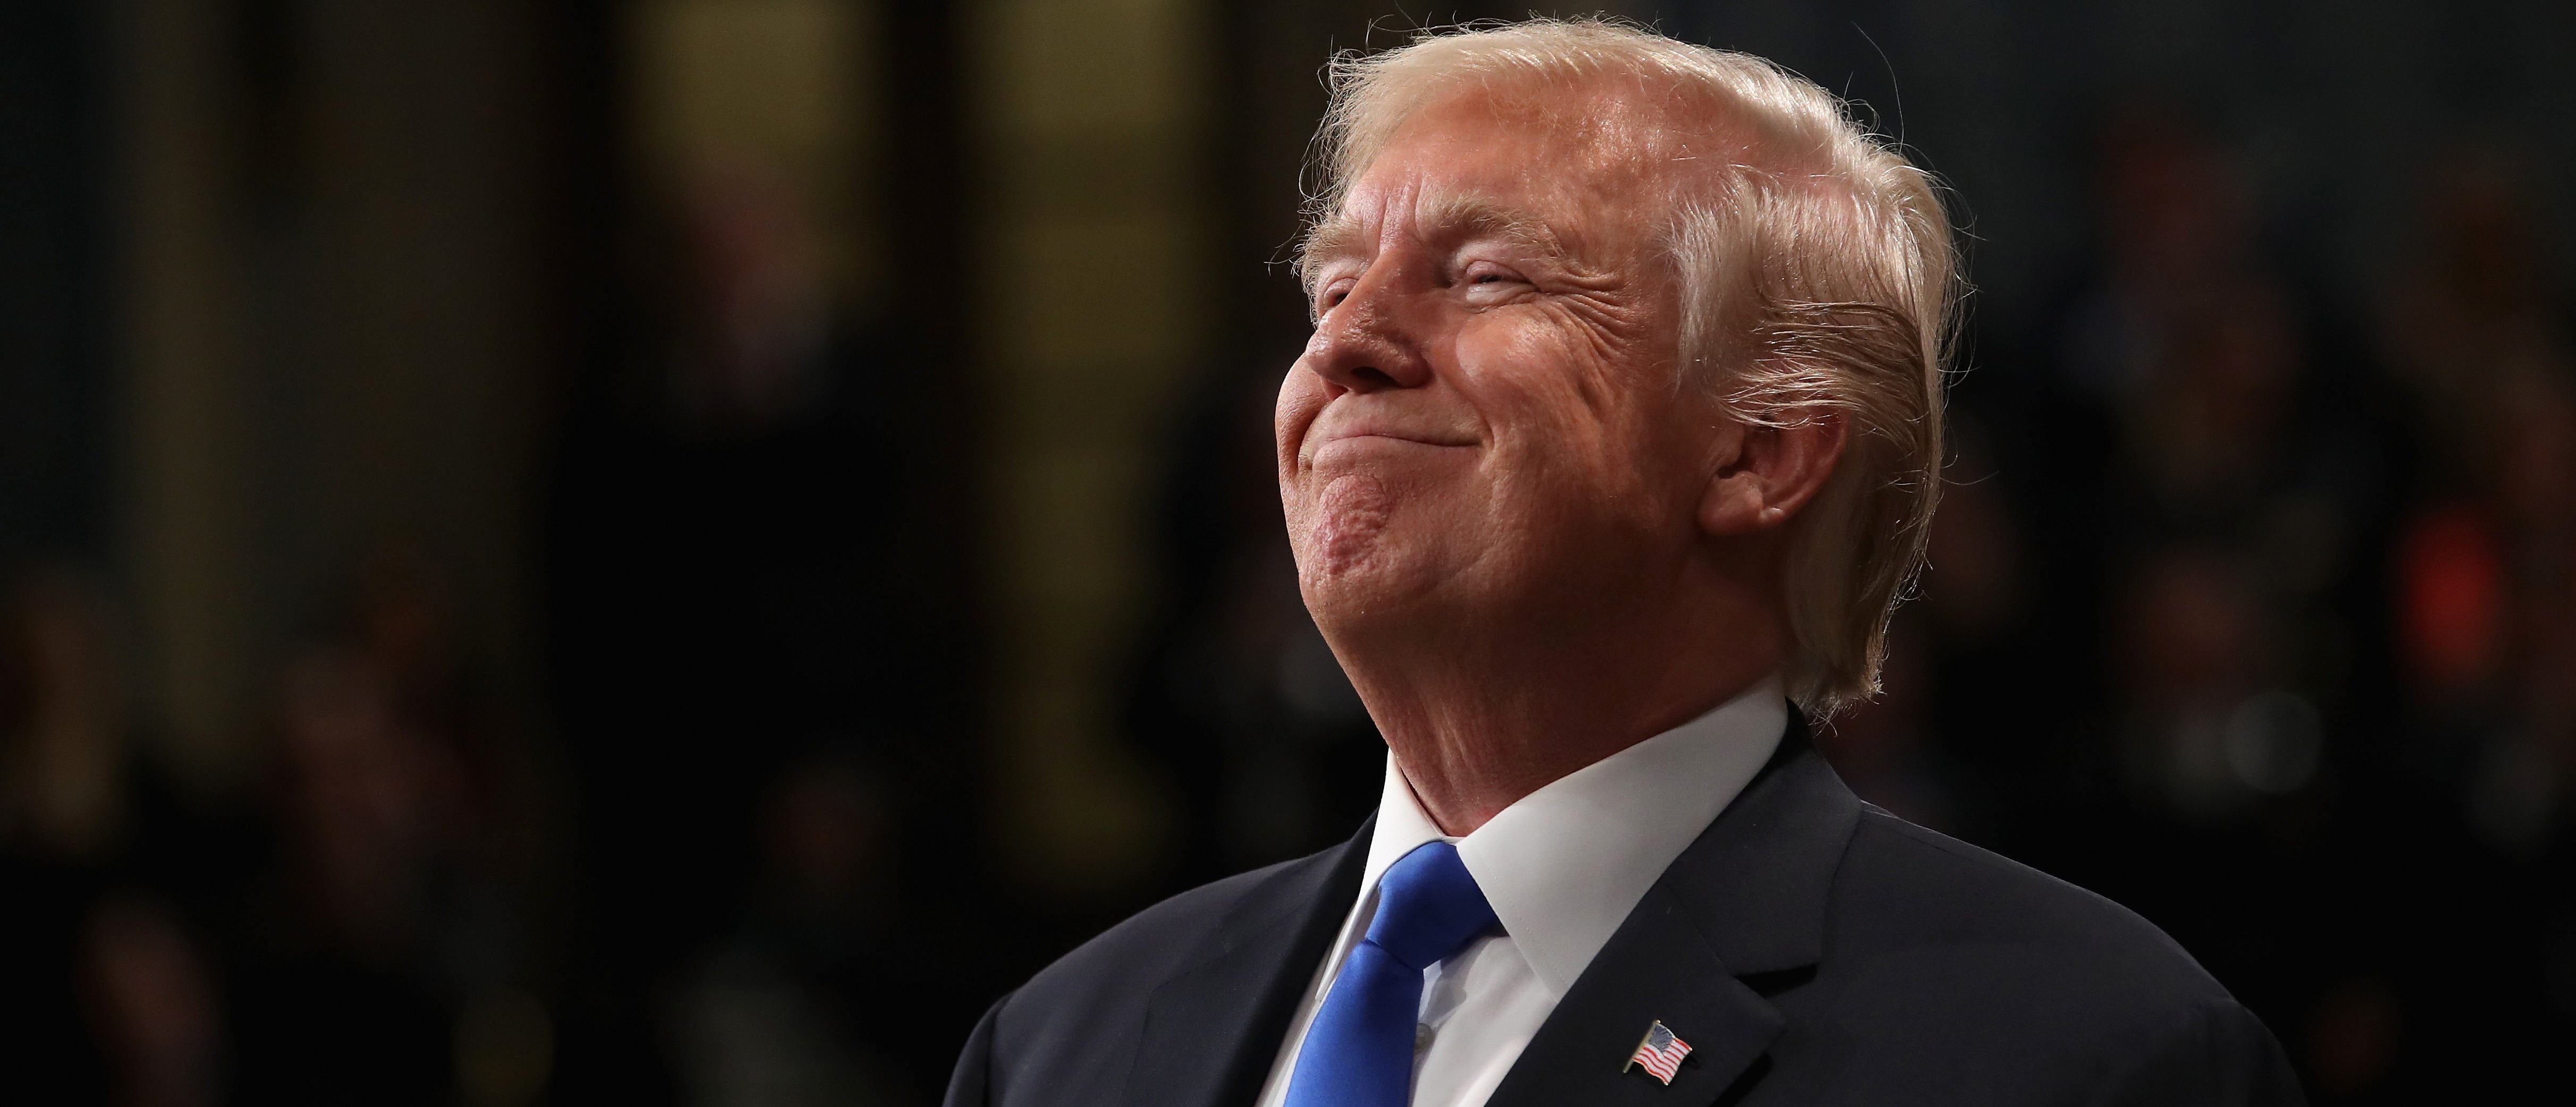 WASHINGTON, DC - JANUARY 30: U.S. President Donald J. Trump smiles during the State of the Union address in the chamber of the U.S. House of Representatives January 30, 2018 in Washington, DC. This is the first State of the Union address given by U.S. President Donald Trump and his second joint-session address to Congress. (Photo by Win McNamee/Getty Images)